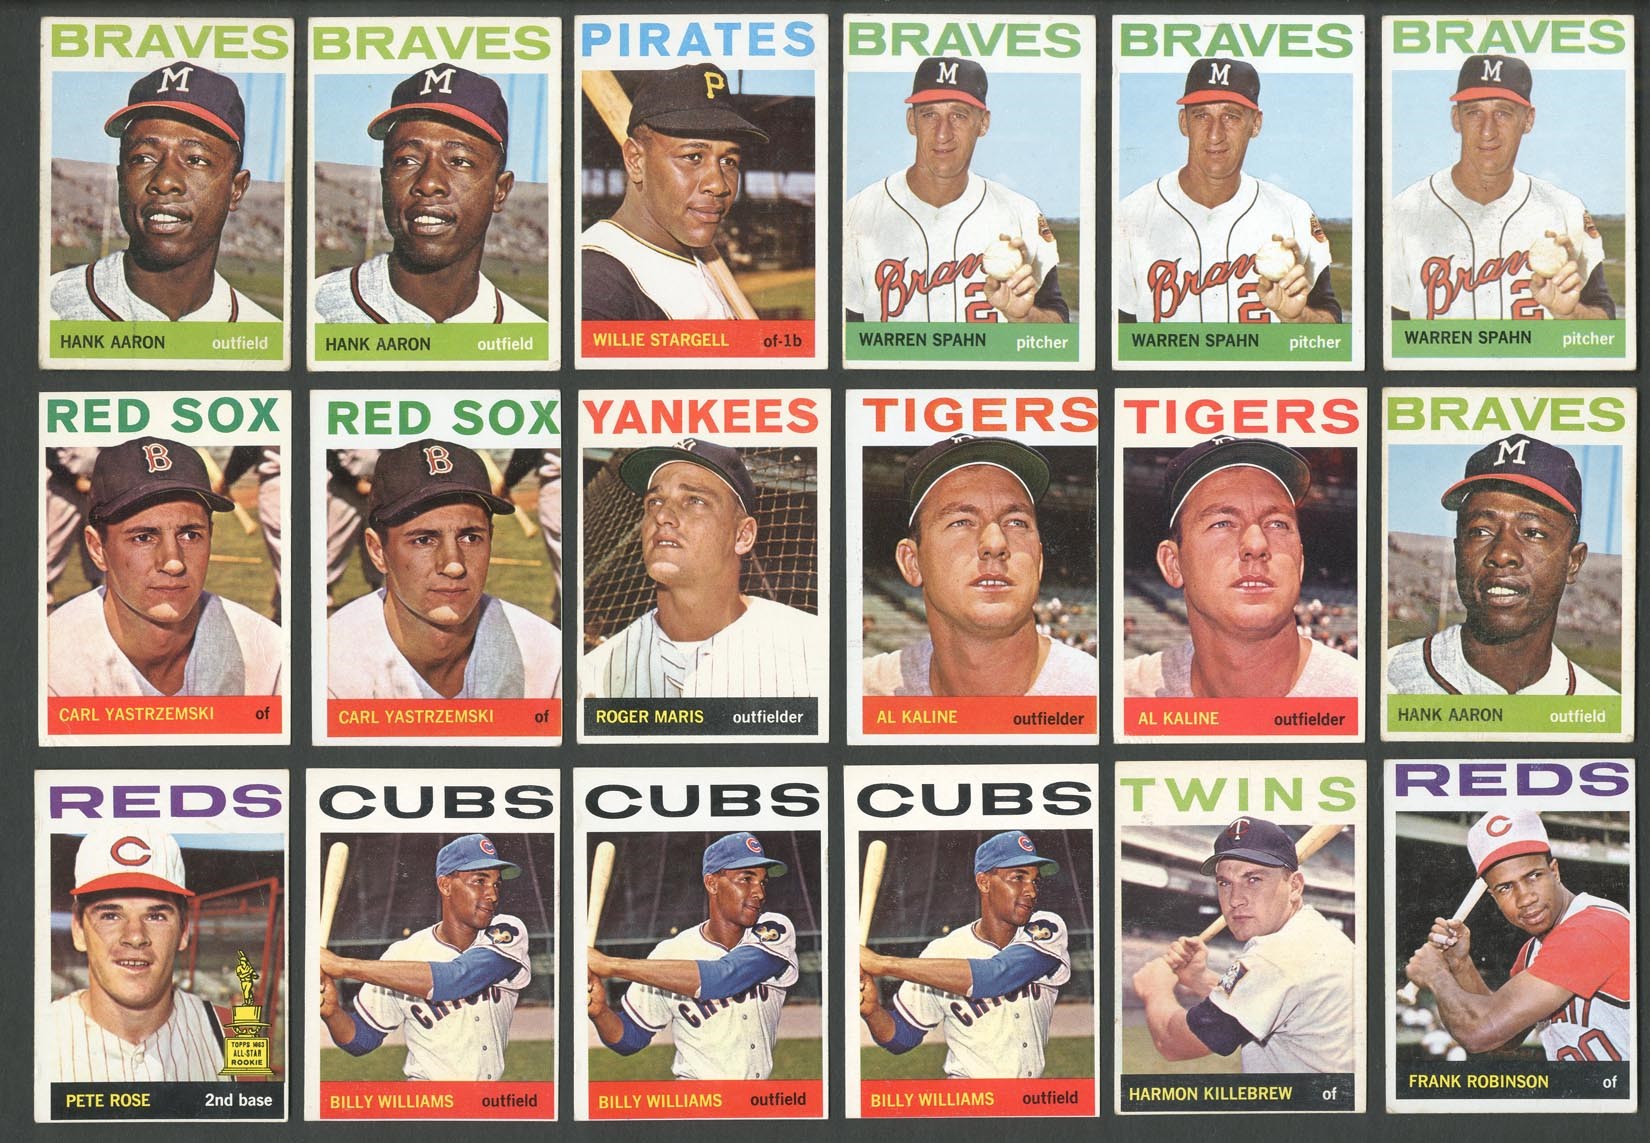 1960s Topps Collection of Low-to-Mid Grade Cards